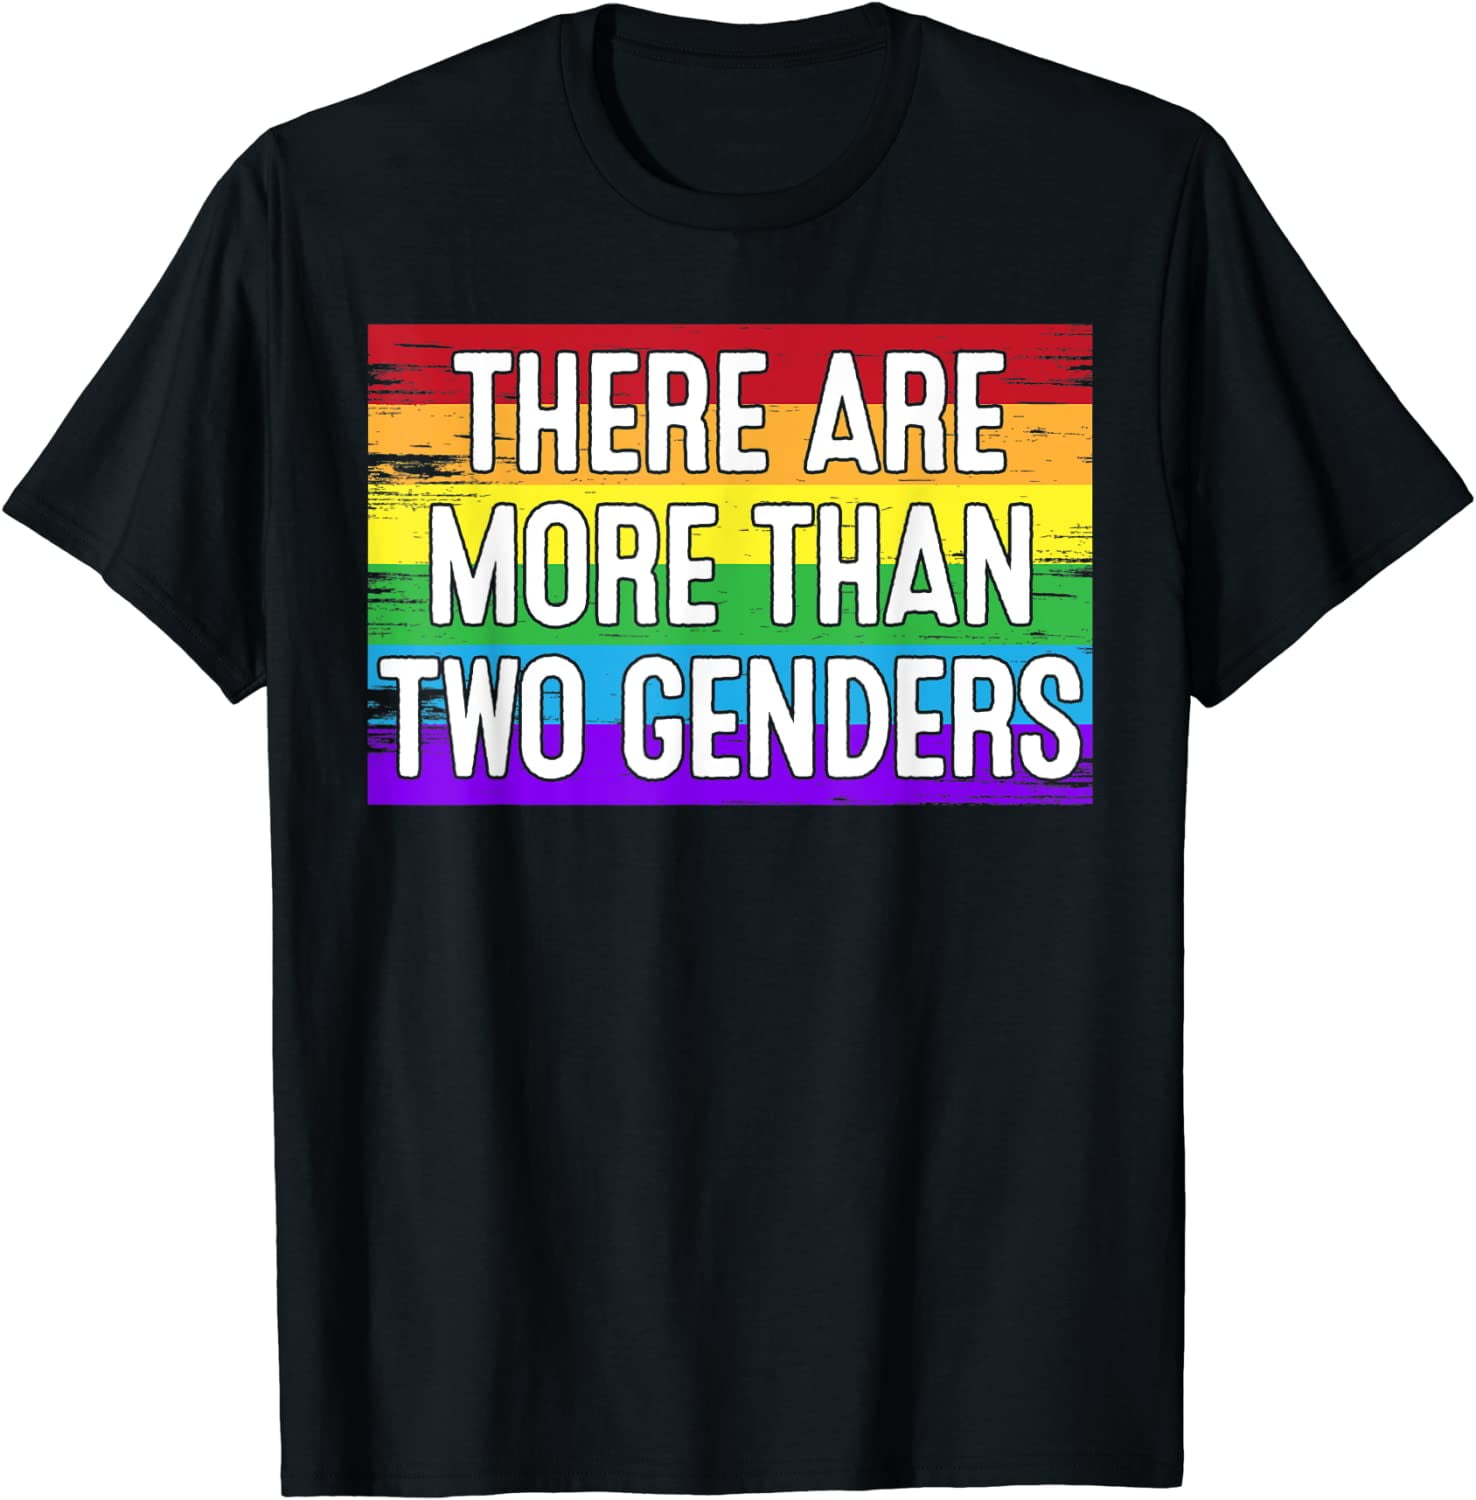 There Are More Than 2 Genders T-shirt - Walmart.com